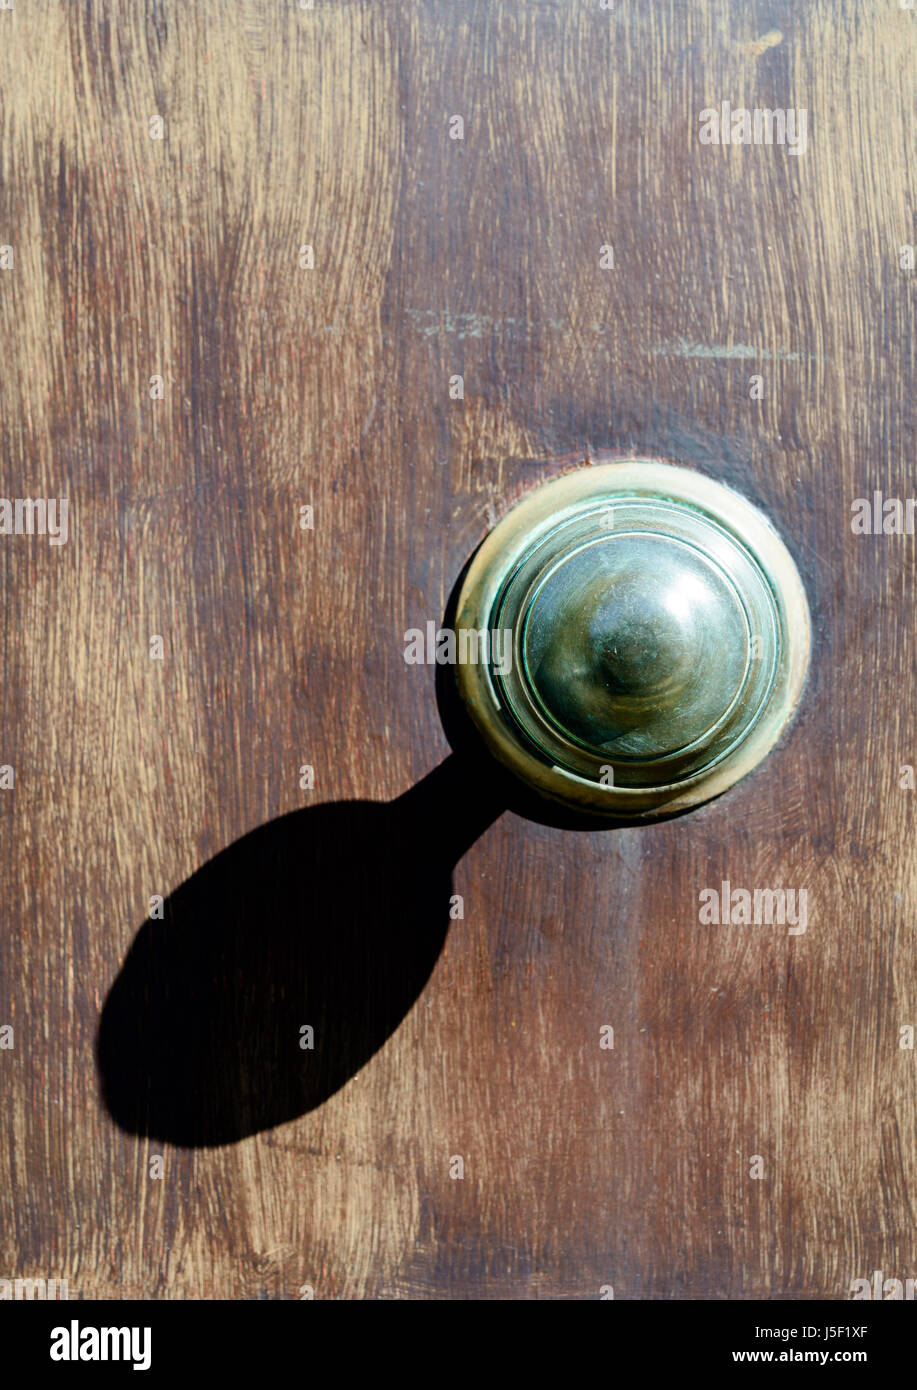 Large door knob casting a strong shadow on a faded door. Stock Photo